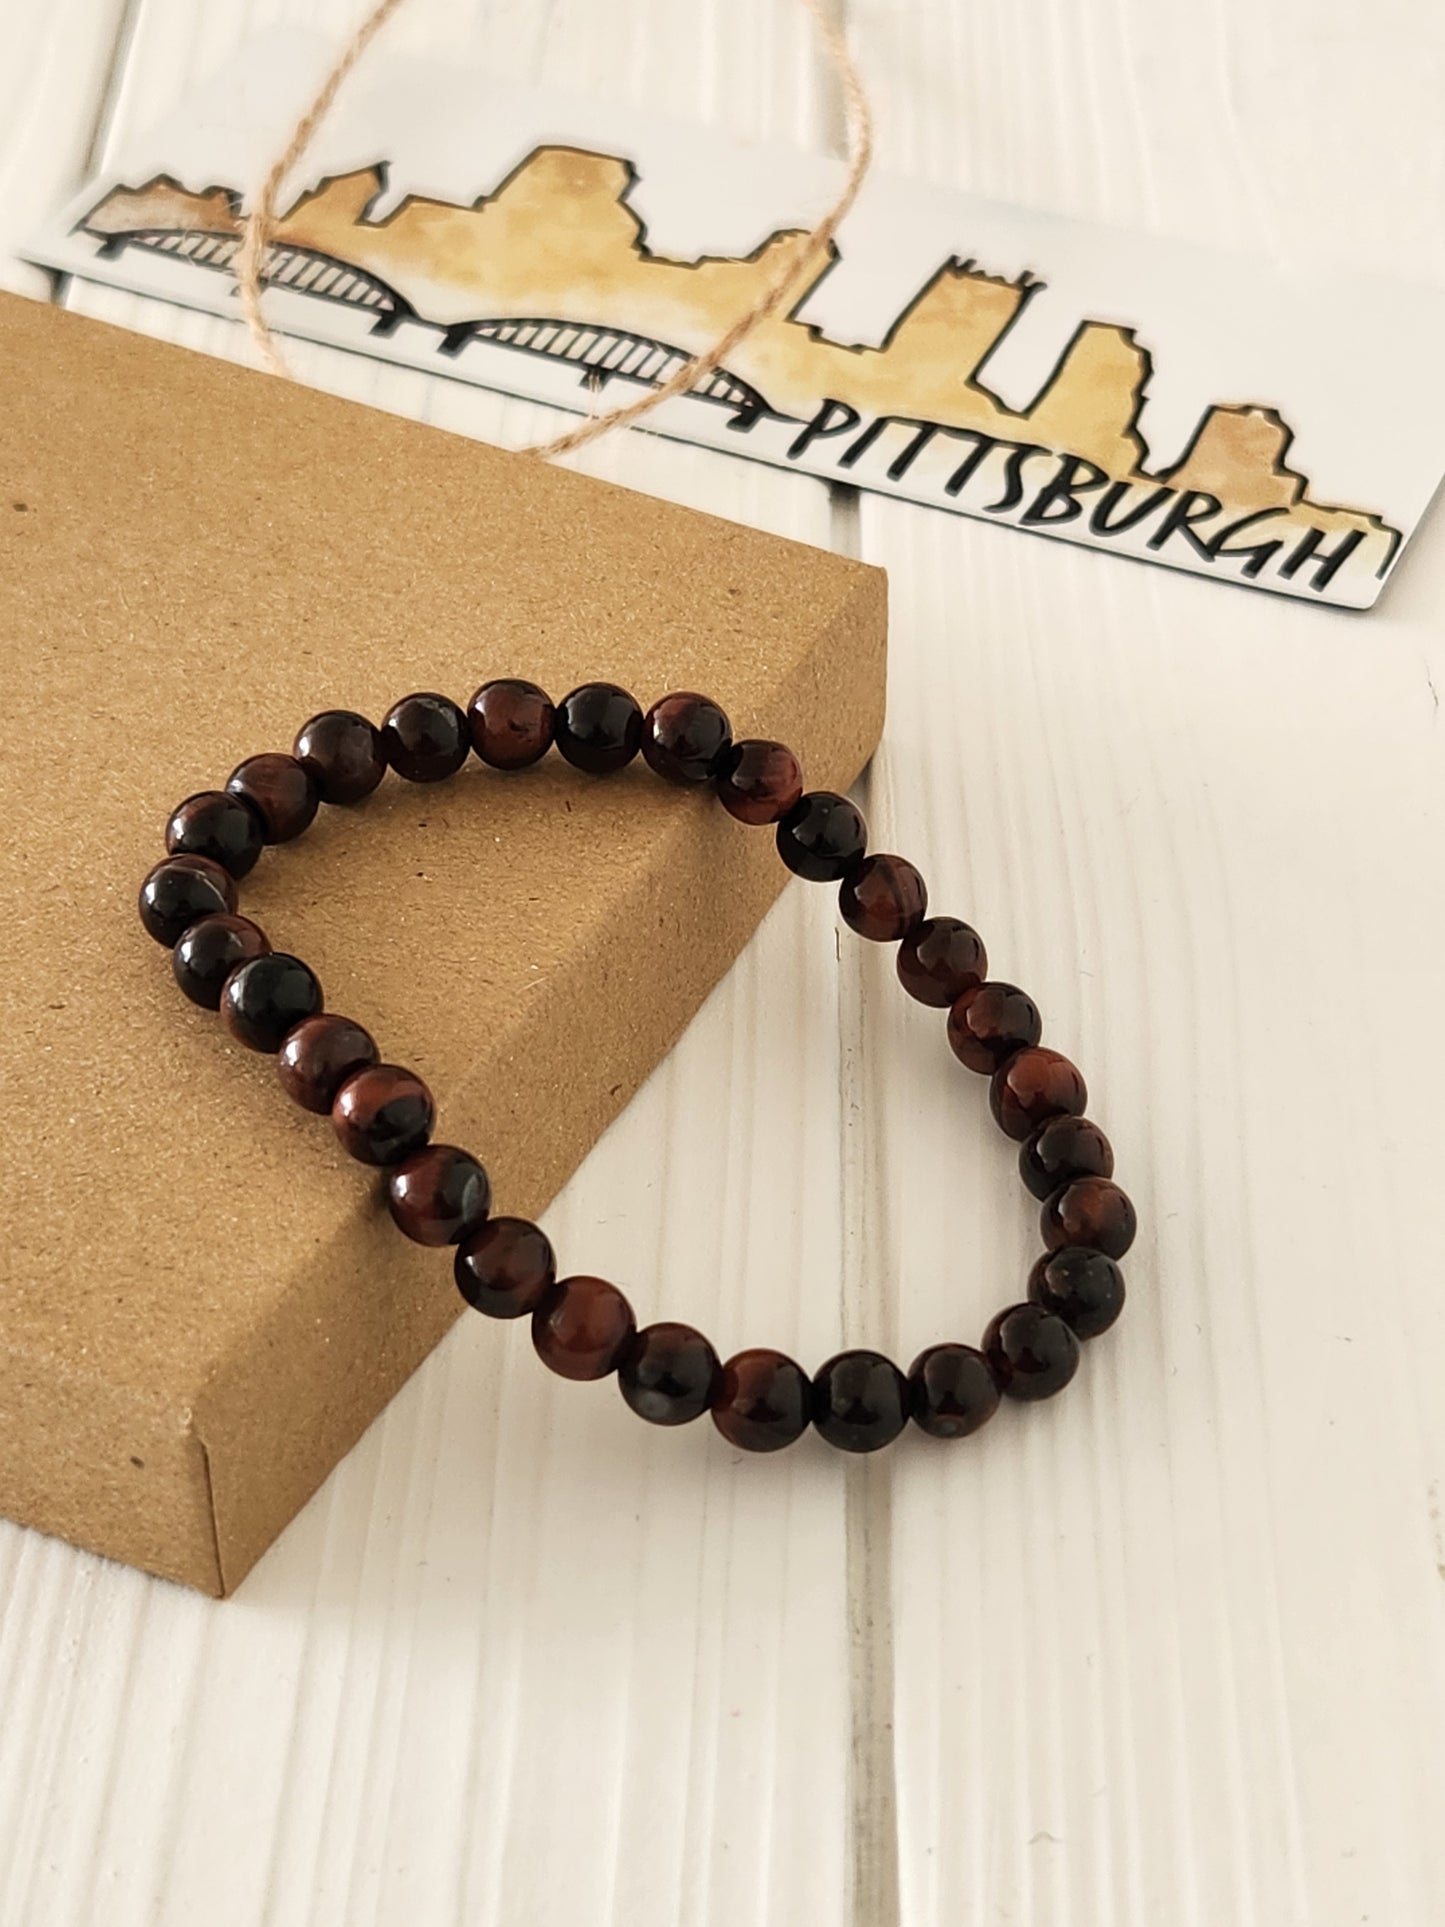 Red Tiger Eye Bracelet - Strength- courage - passion